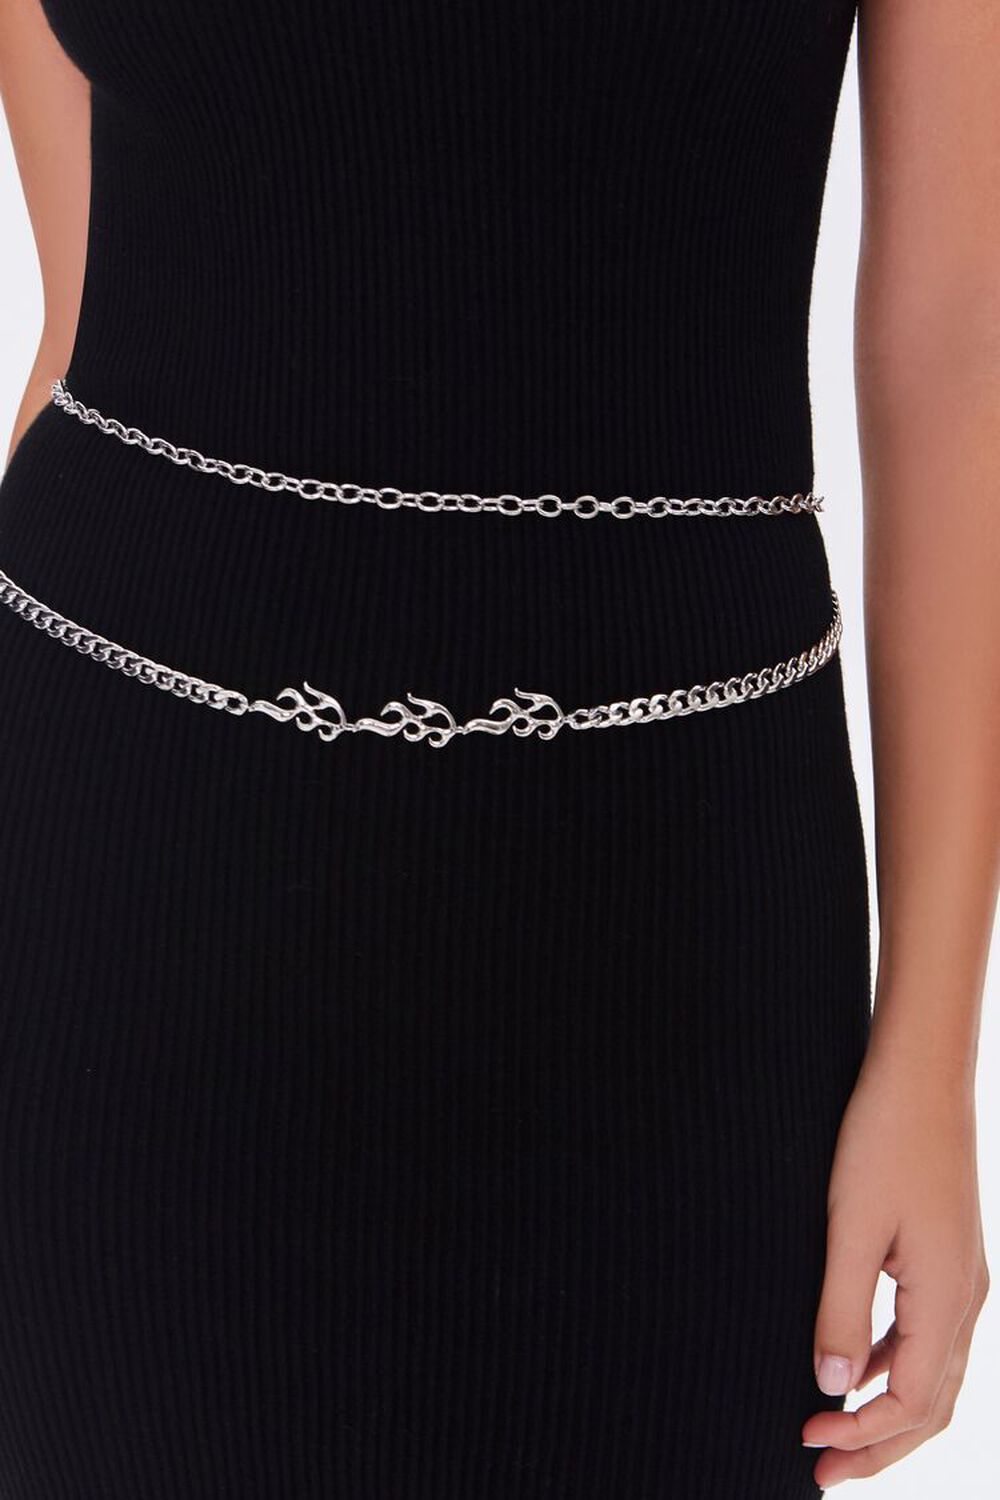 SILVER Flame Chain Hip Layered Belt, image 1